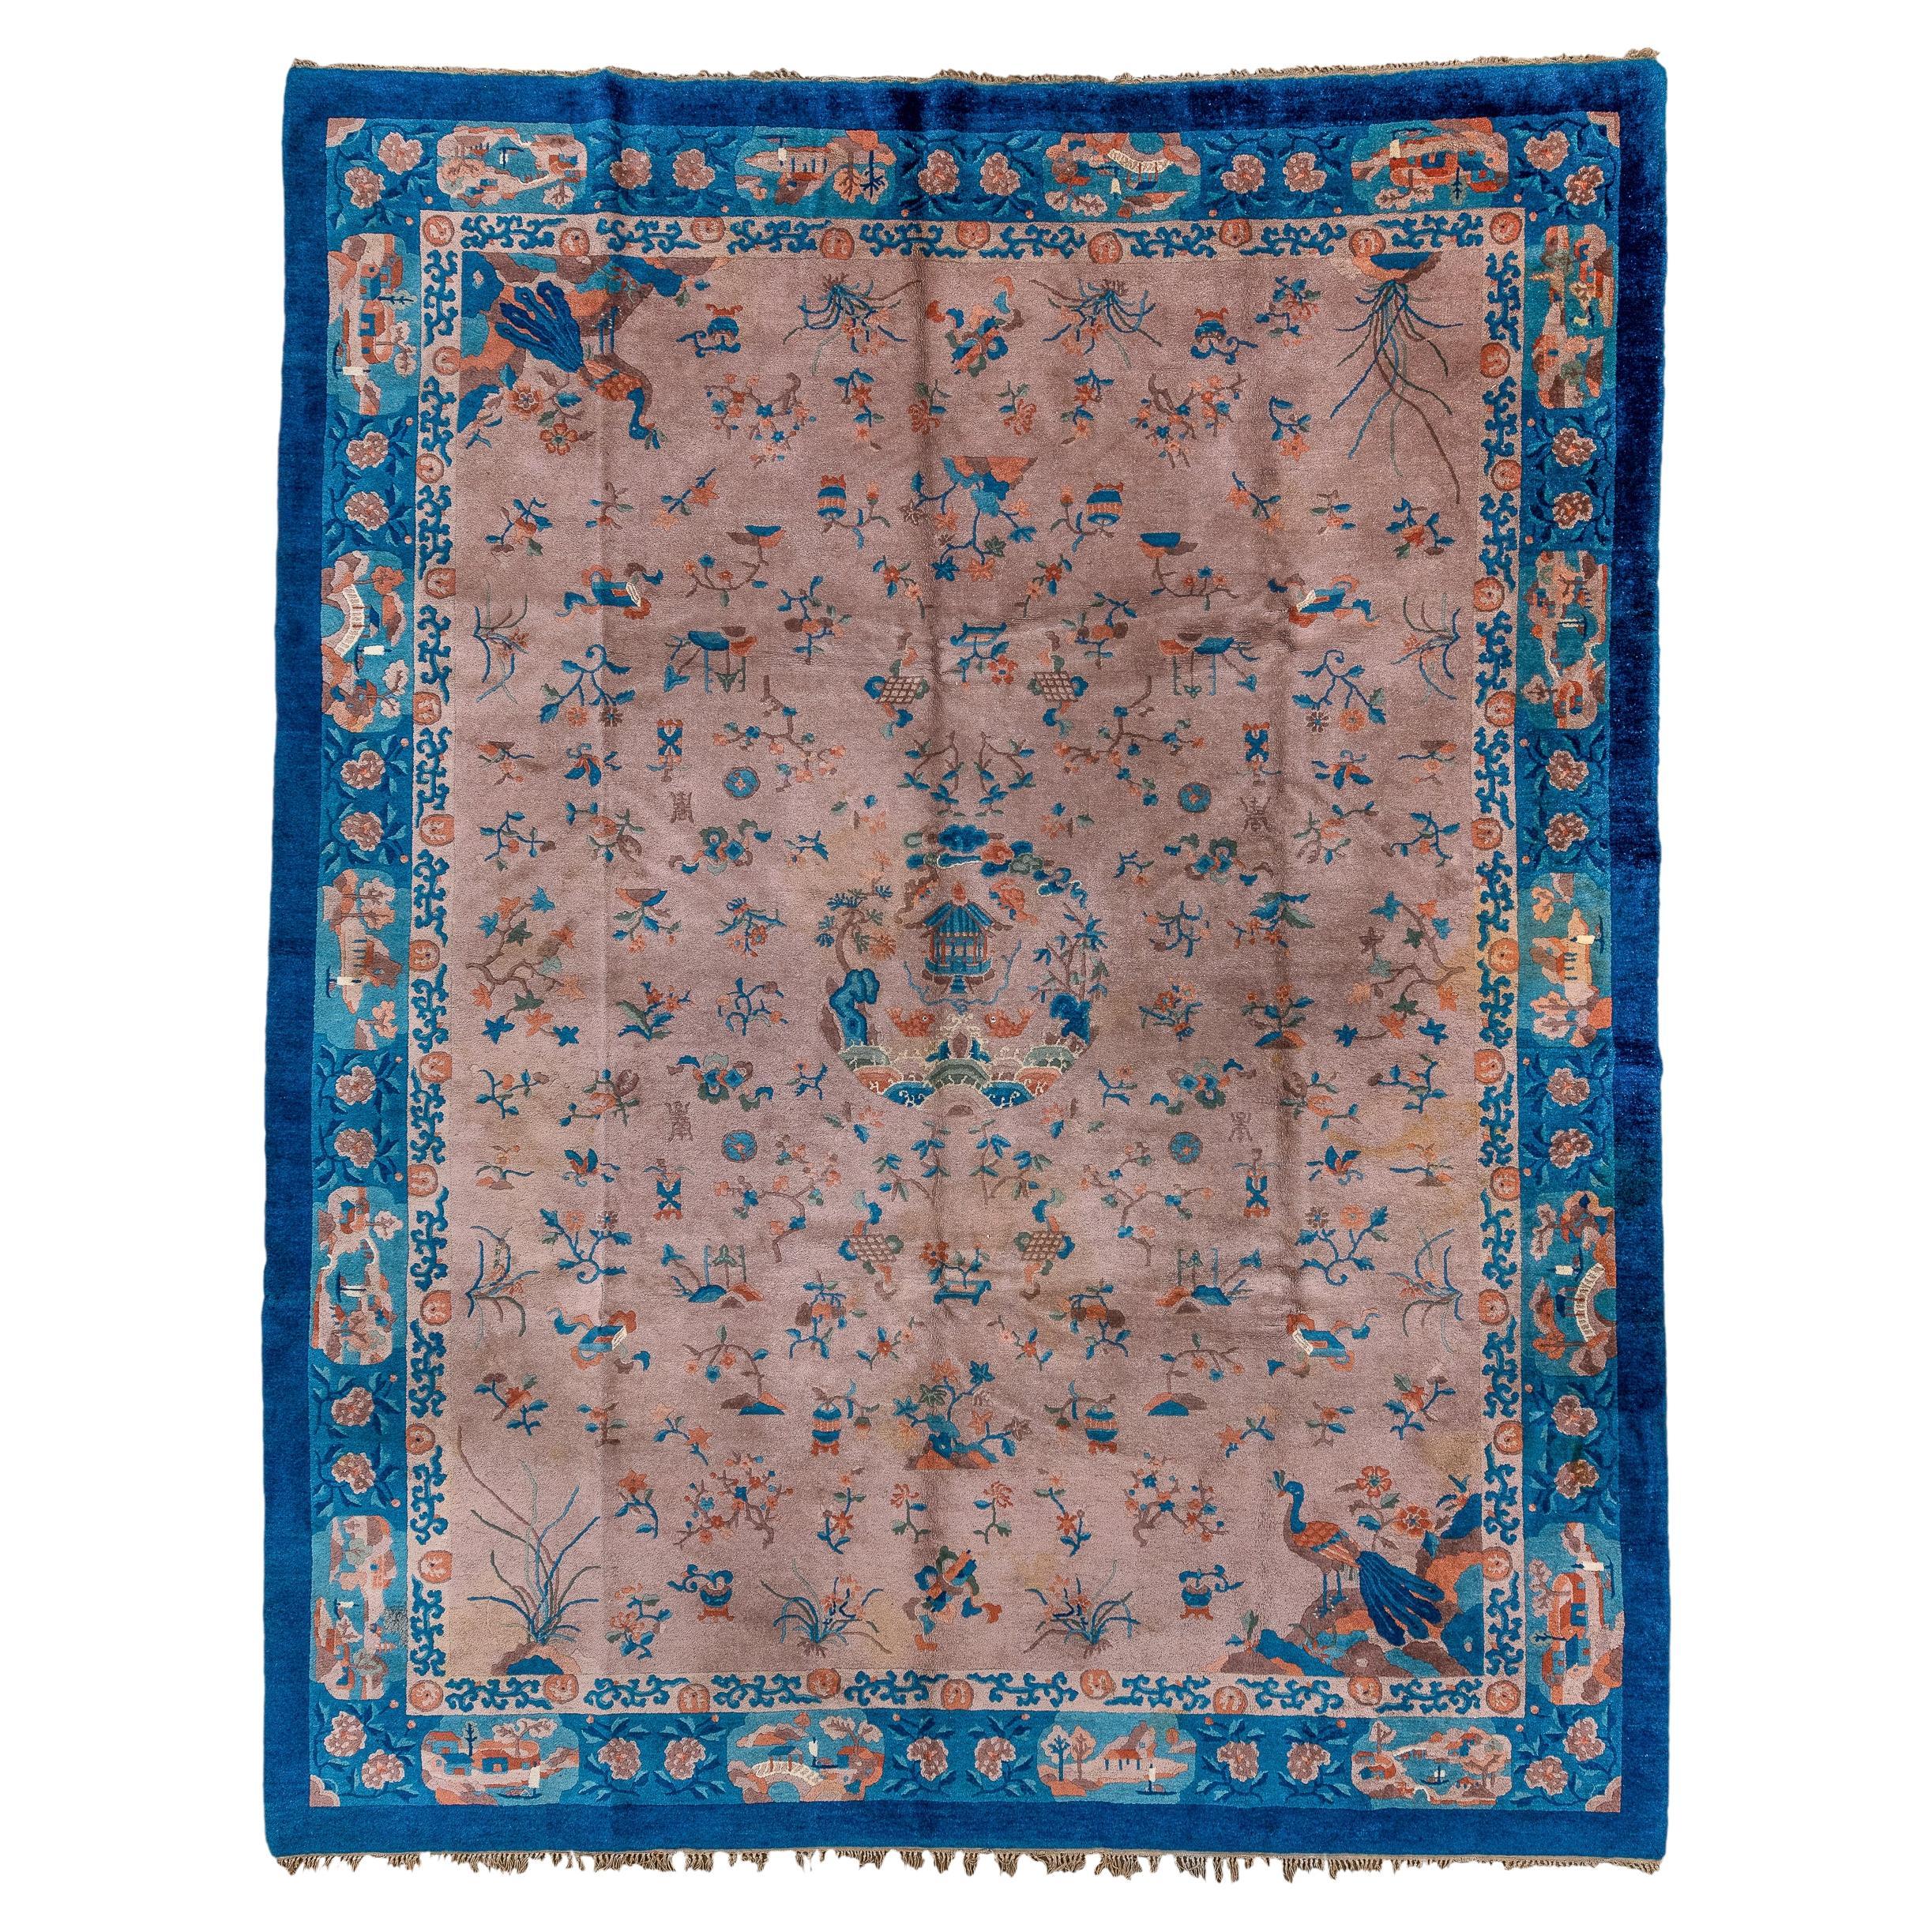 Antique Tientsin Chinese Rug with Tan Field and Allover Chinese Motives